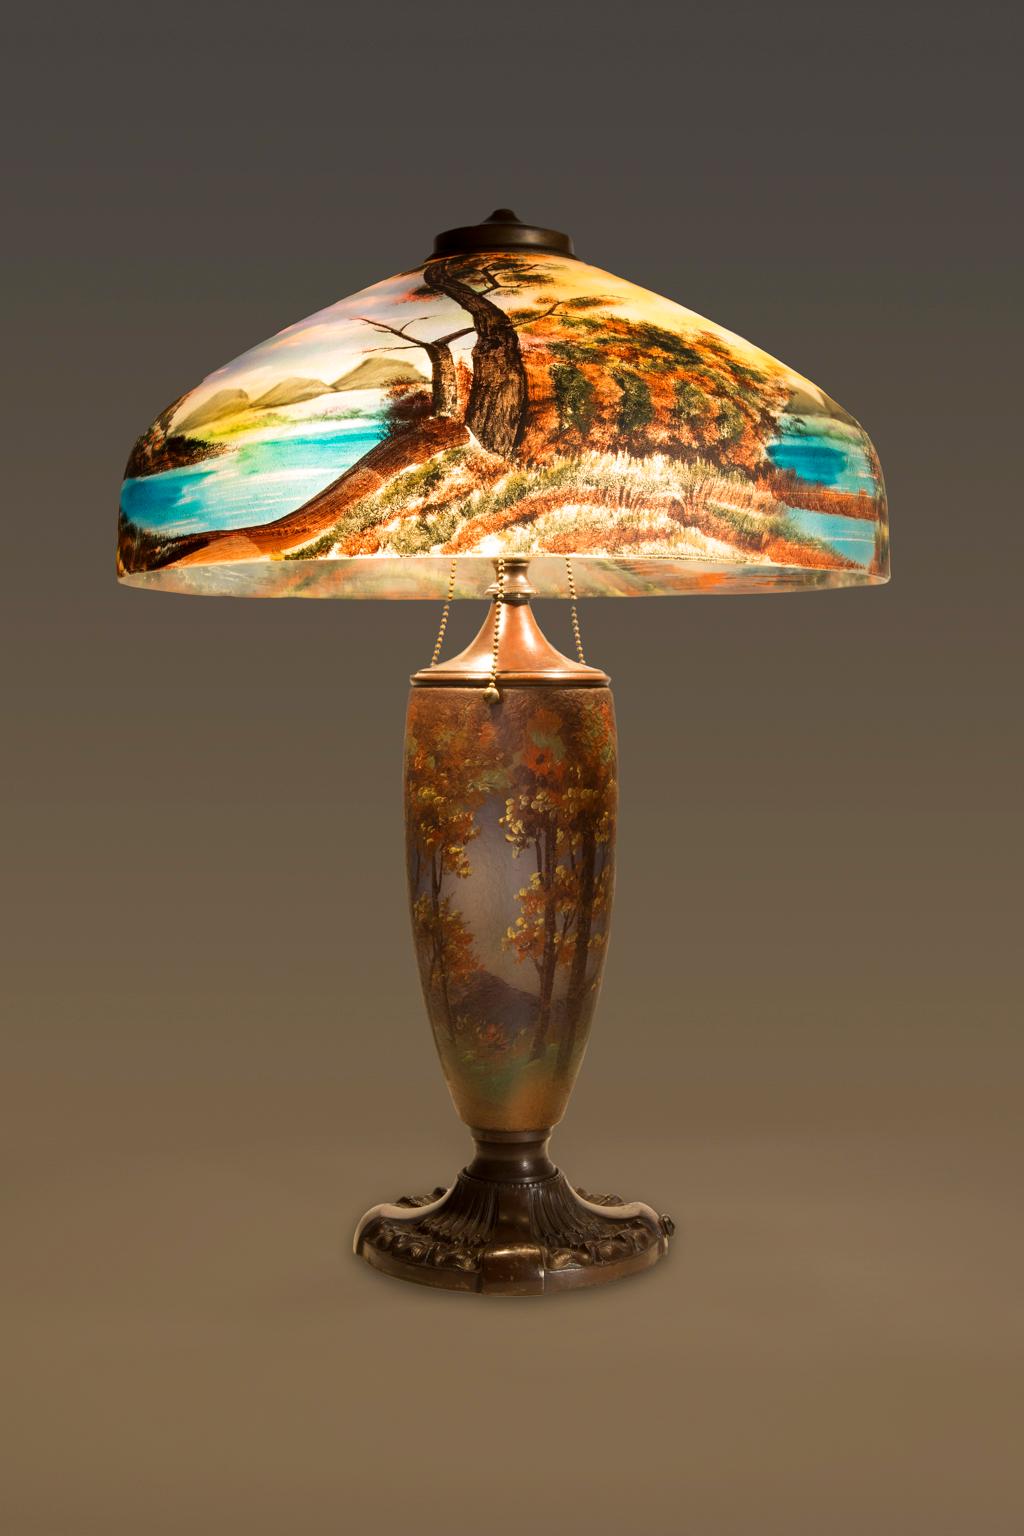 painted glass lampshade